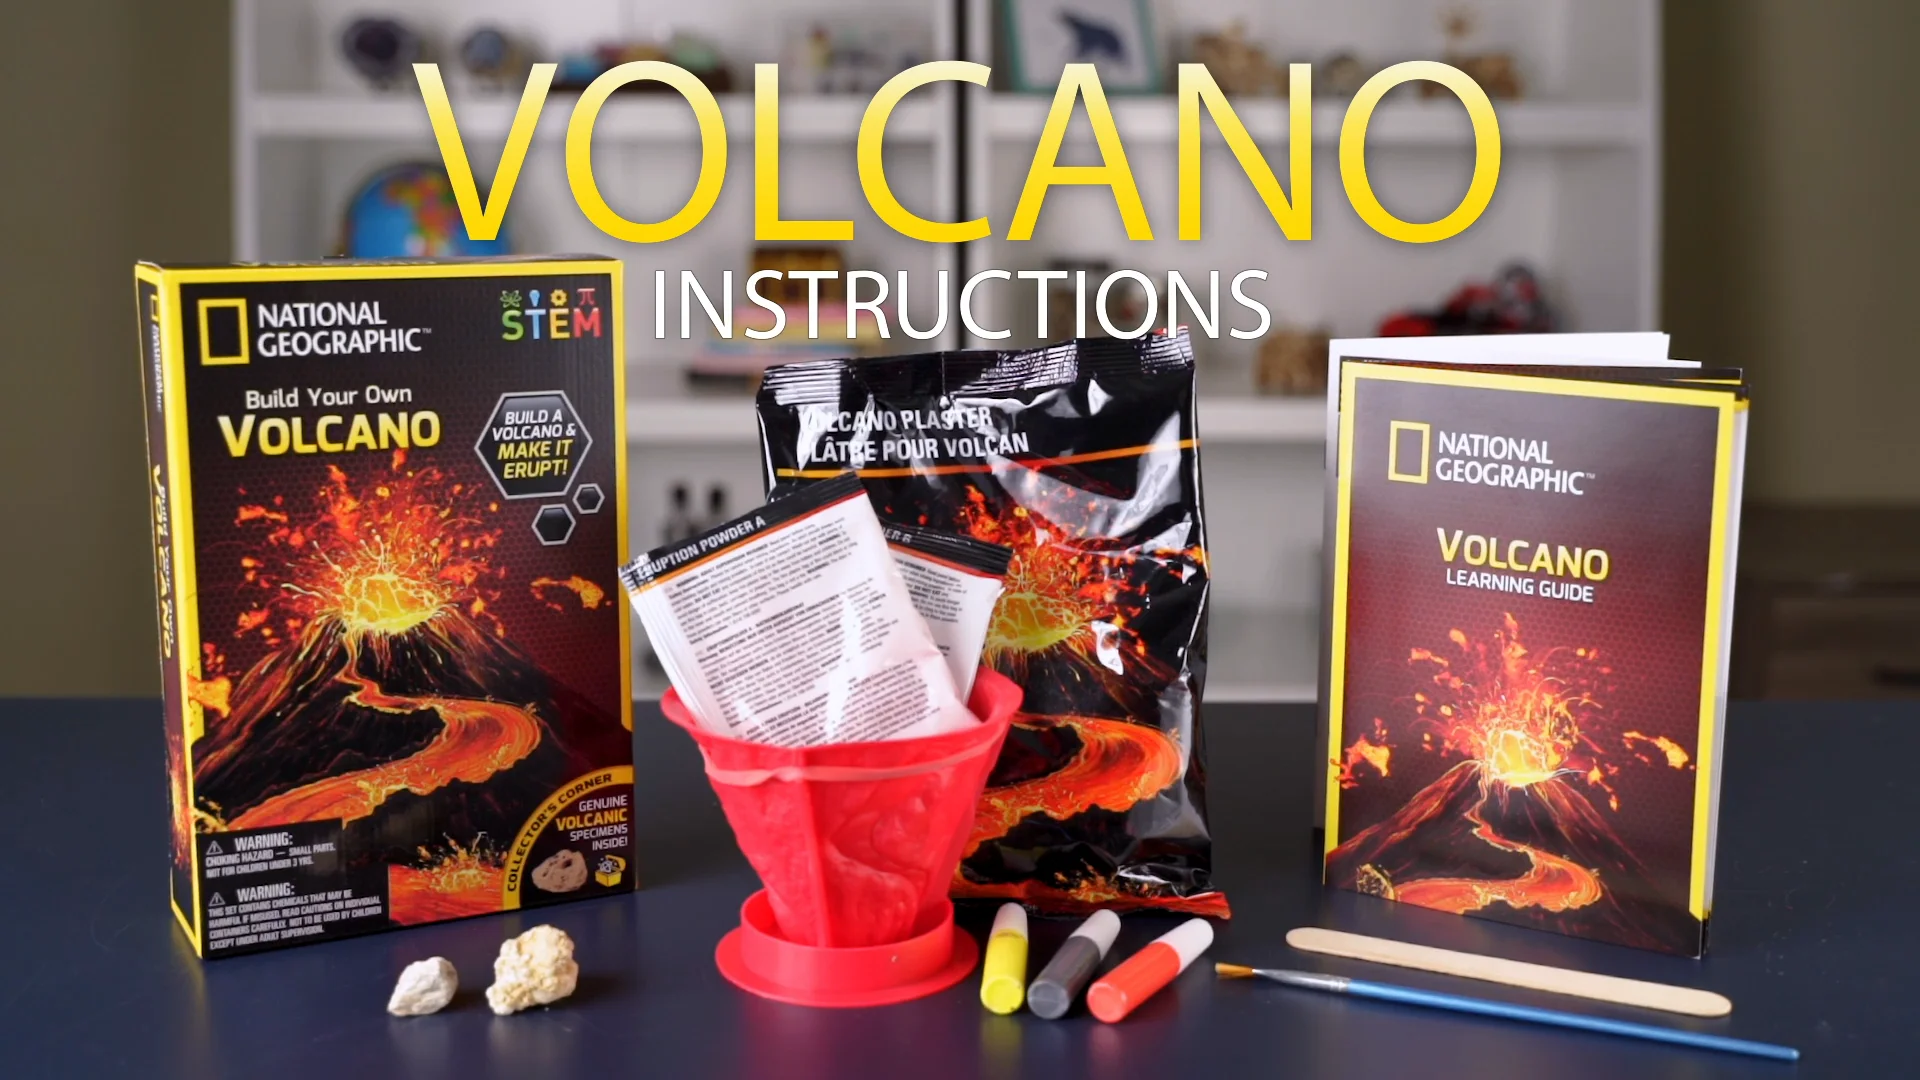 Volcano Instructions - National Geographic on Vimeo